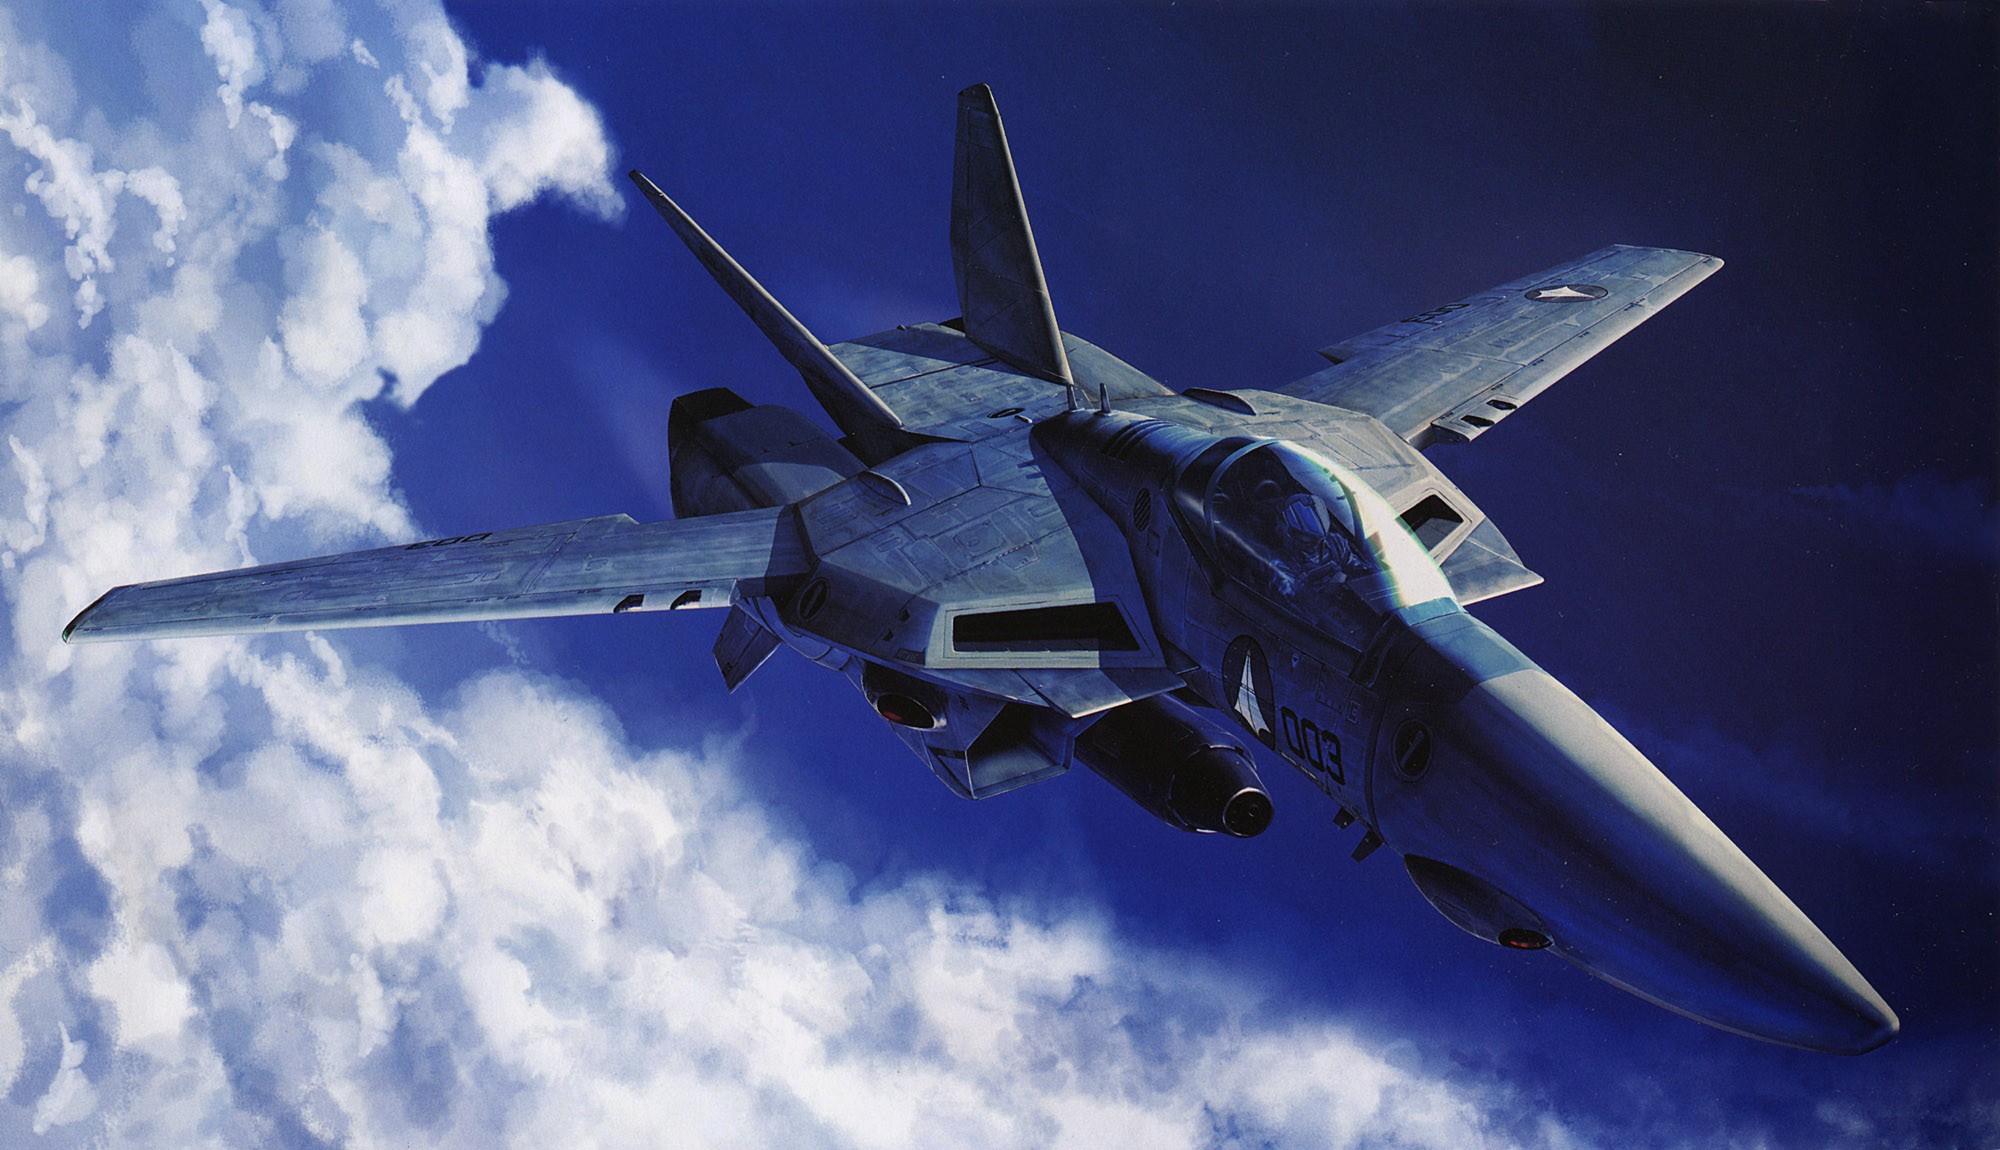 General 2000x1150 Macross jets aircraft military aircraft vehicle futuristic Veritech Fighter